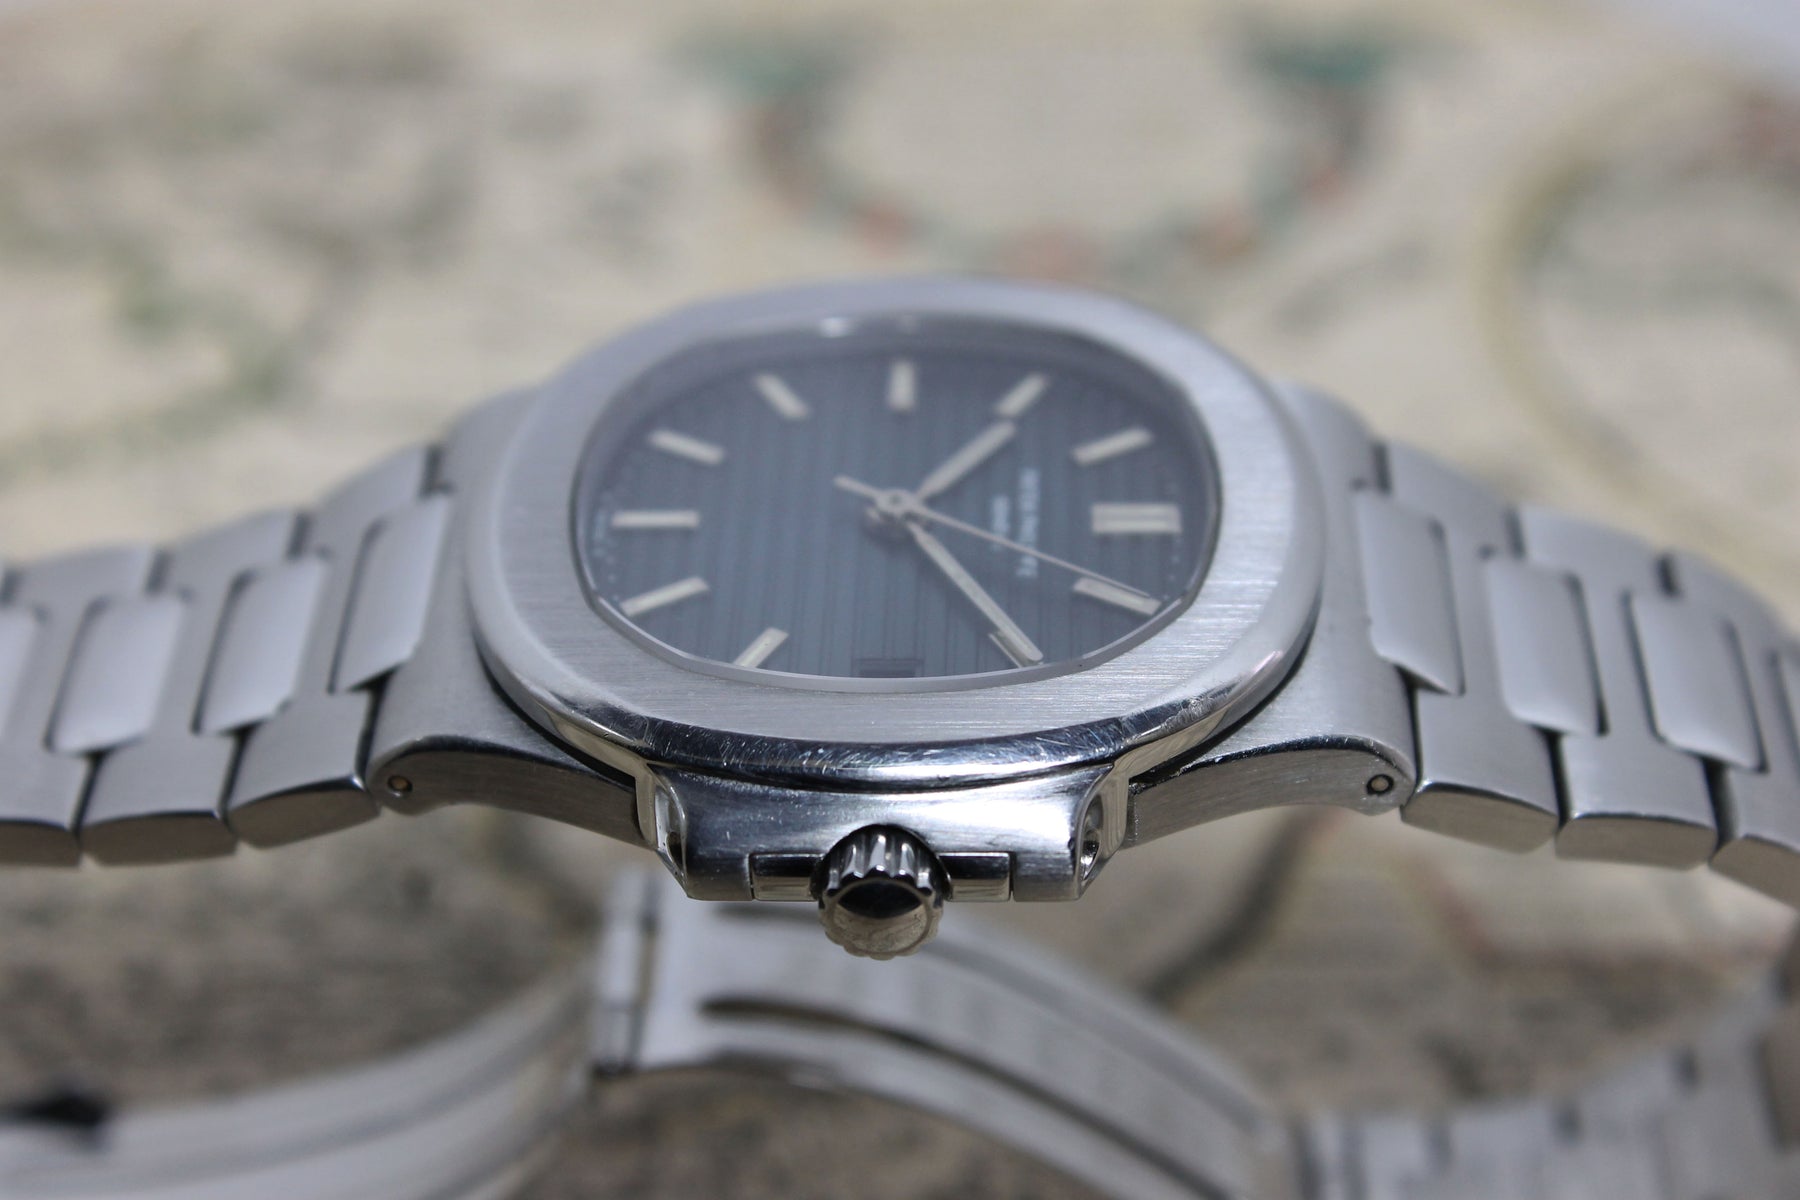 Patek Philippe Nautilus Ref. 3800 Year 1985 (with Box & Papers)